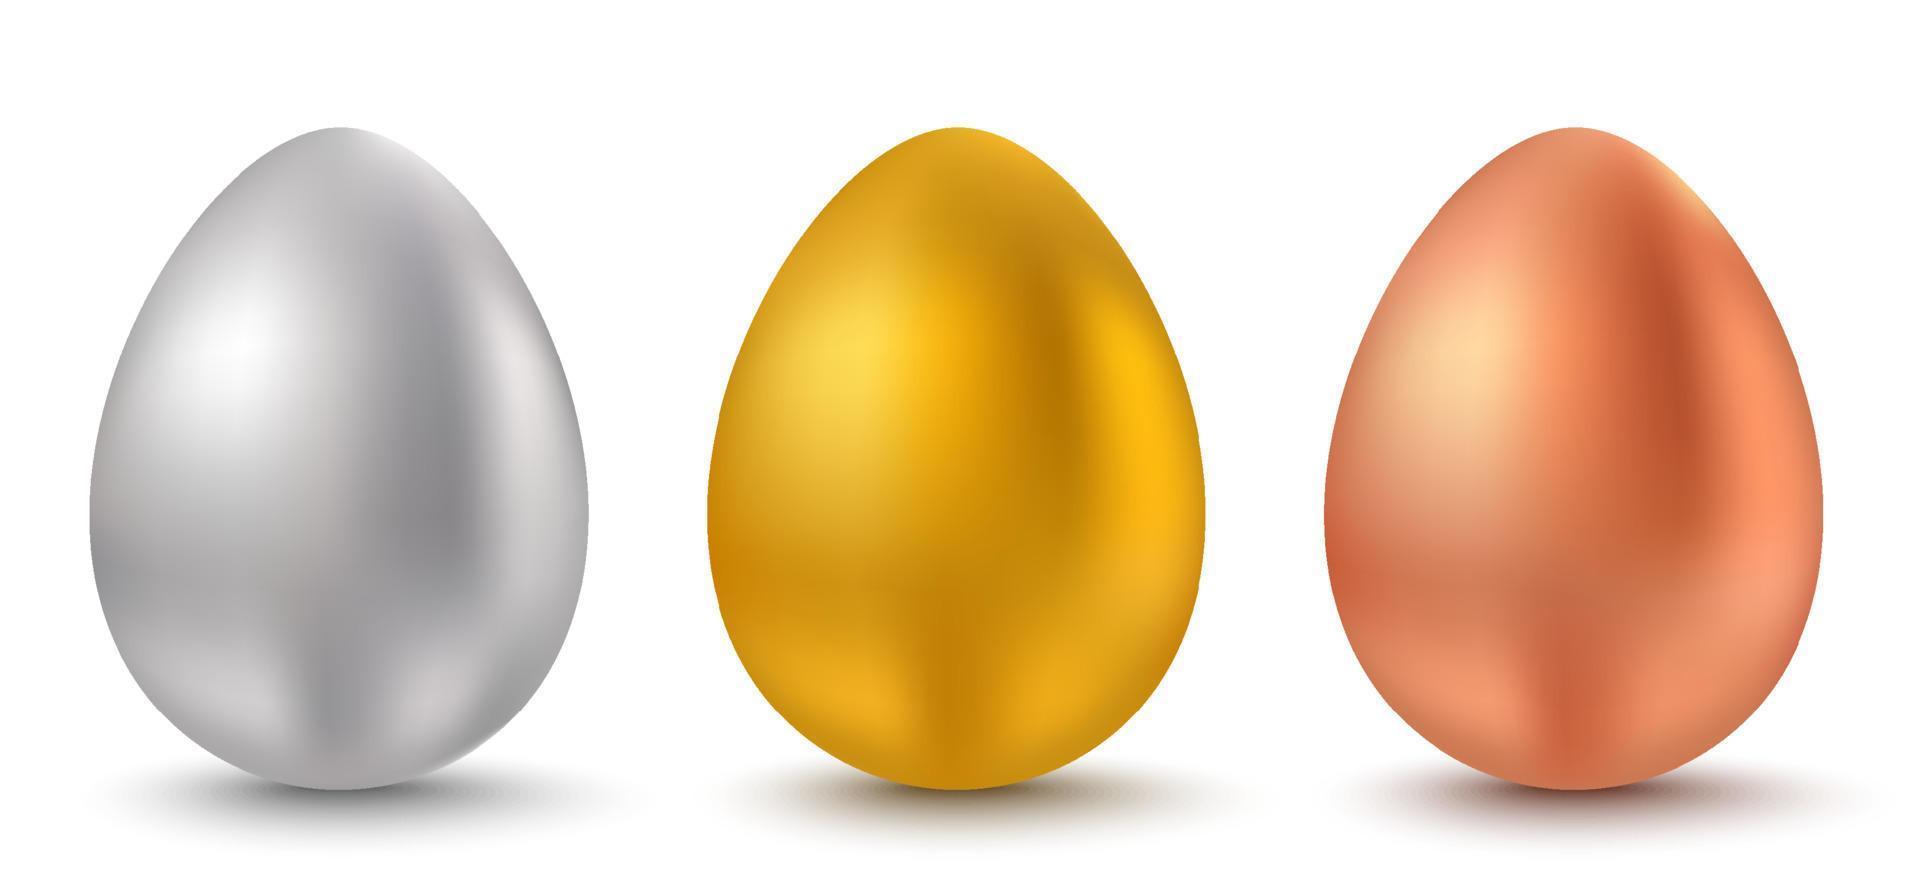 White, golden and chocolate eggs for Easter. vector